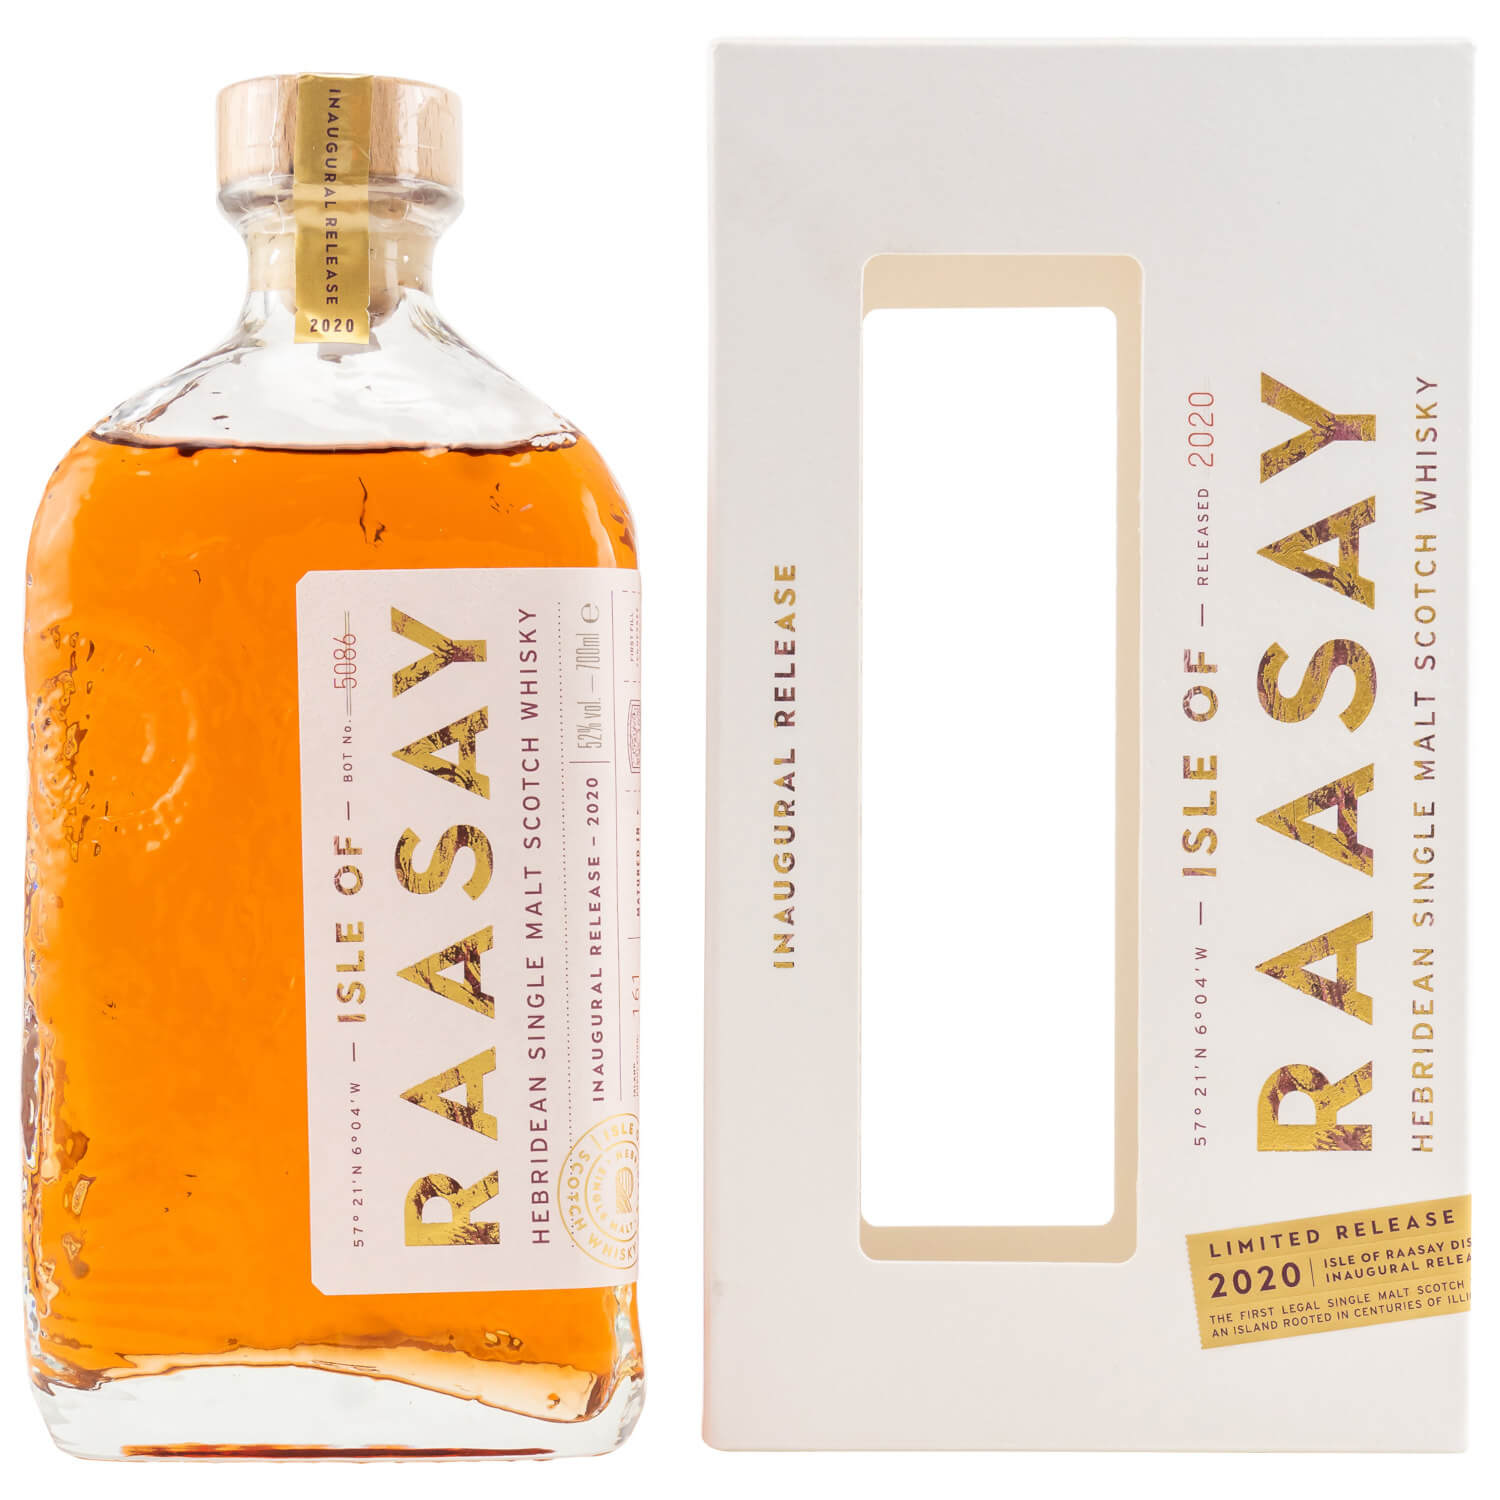 Flasche und Verpackung Isle of Raasay Whisky